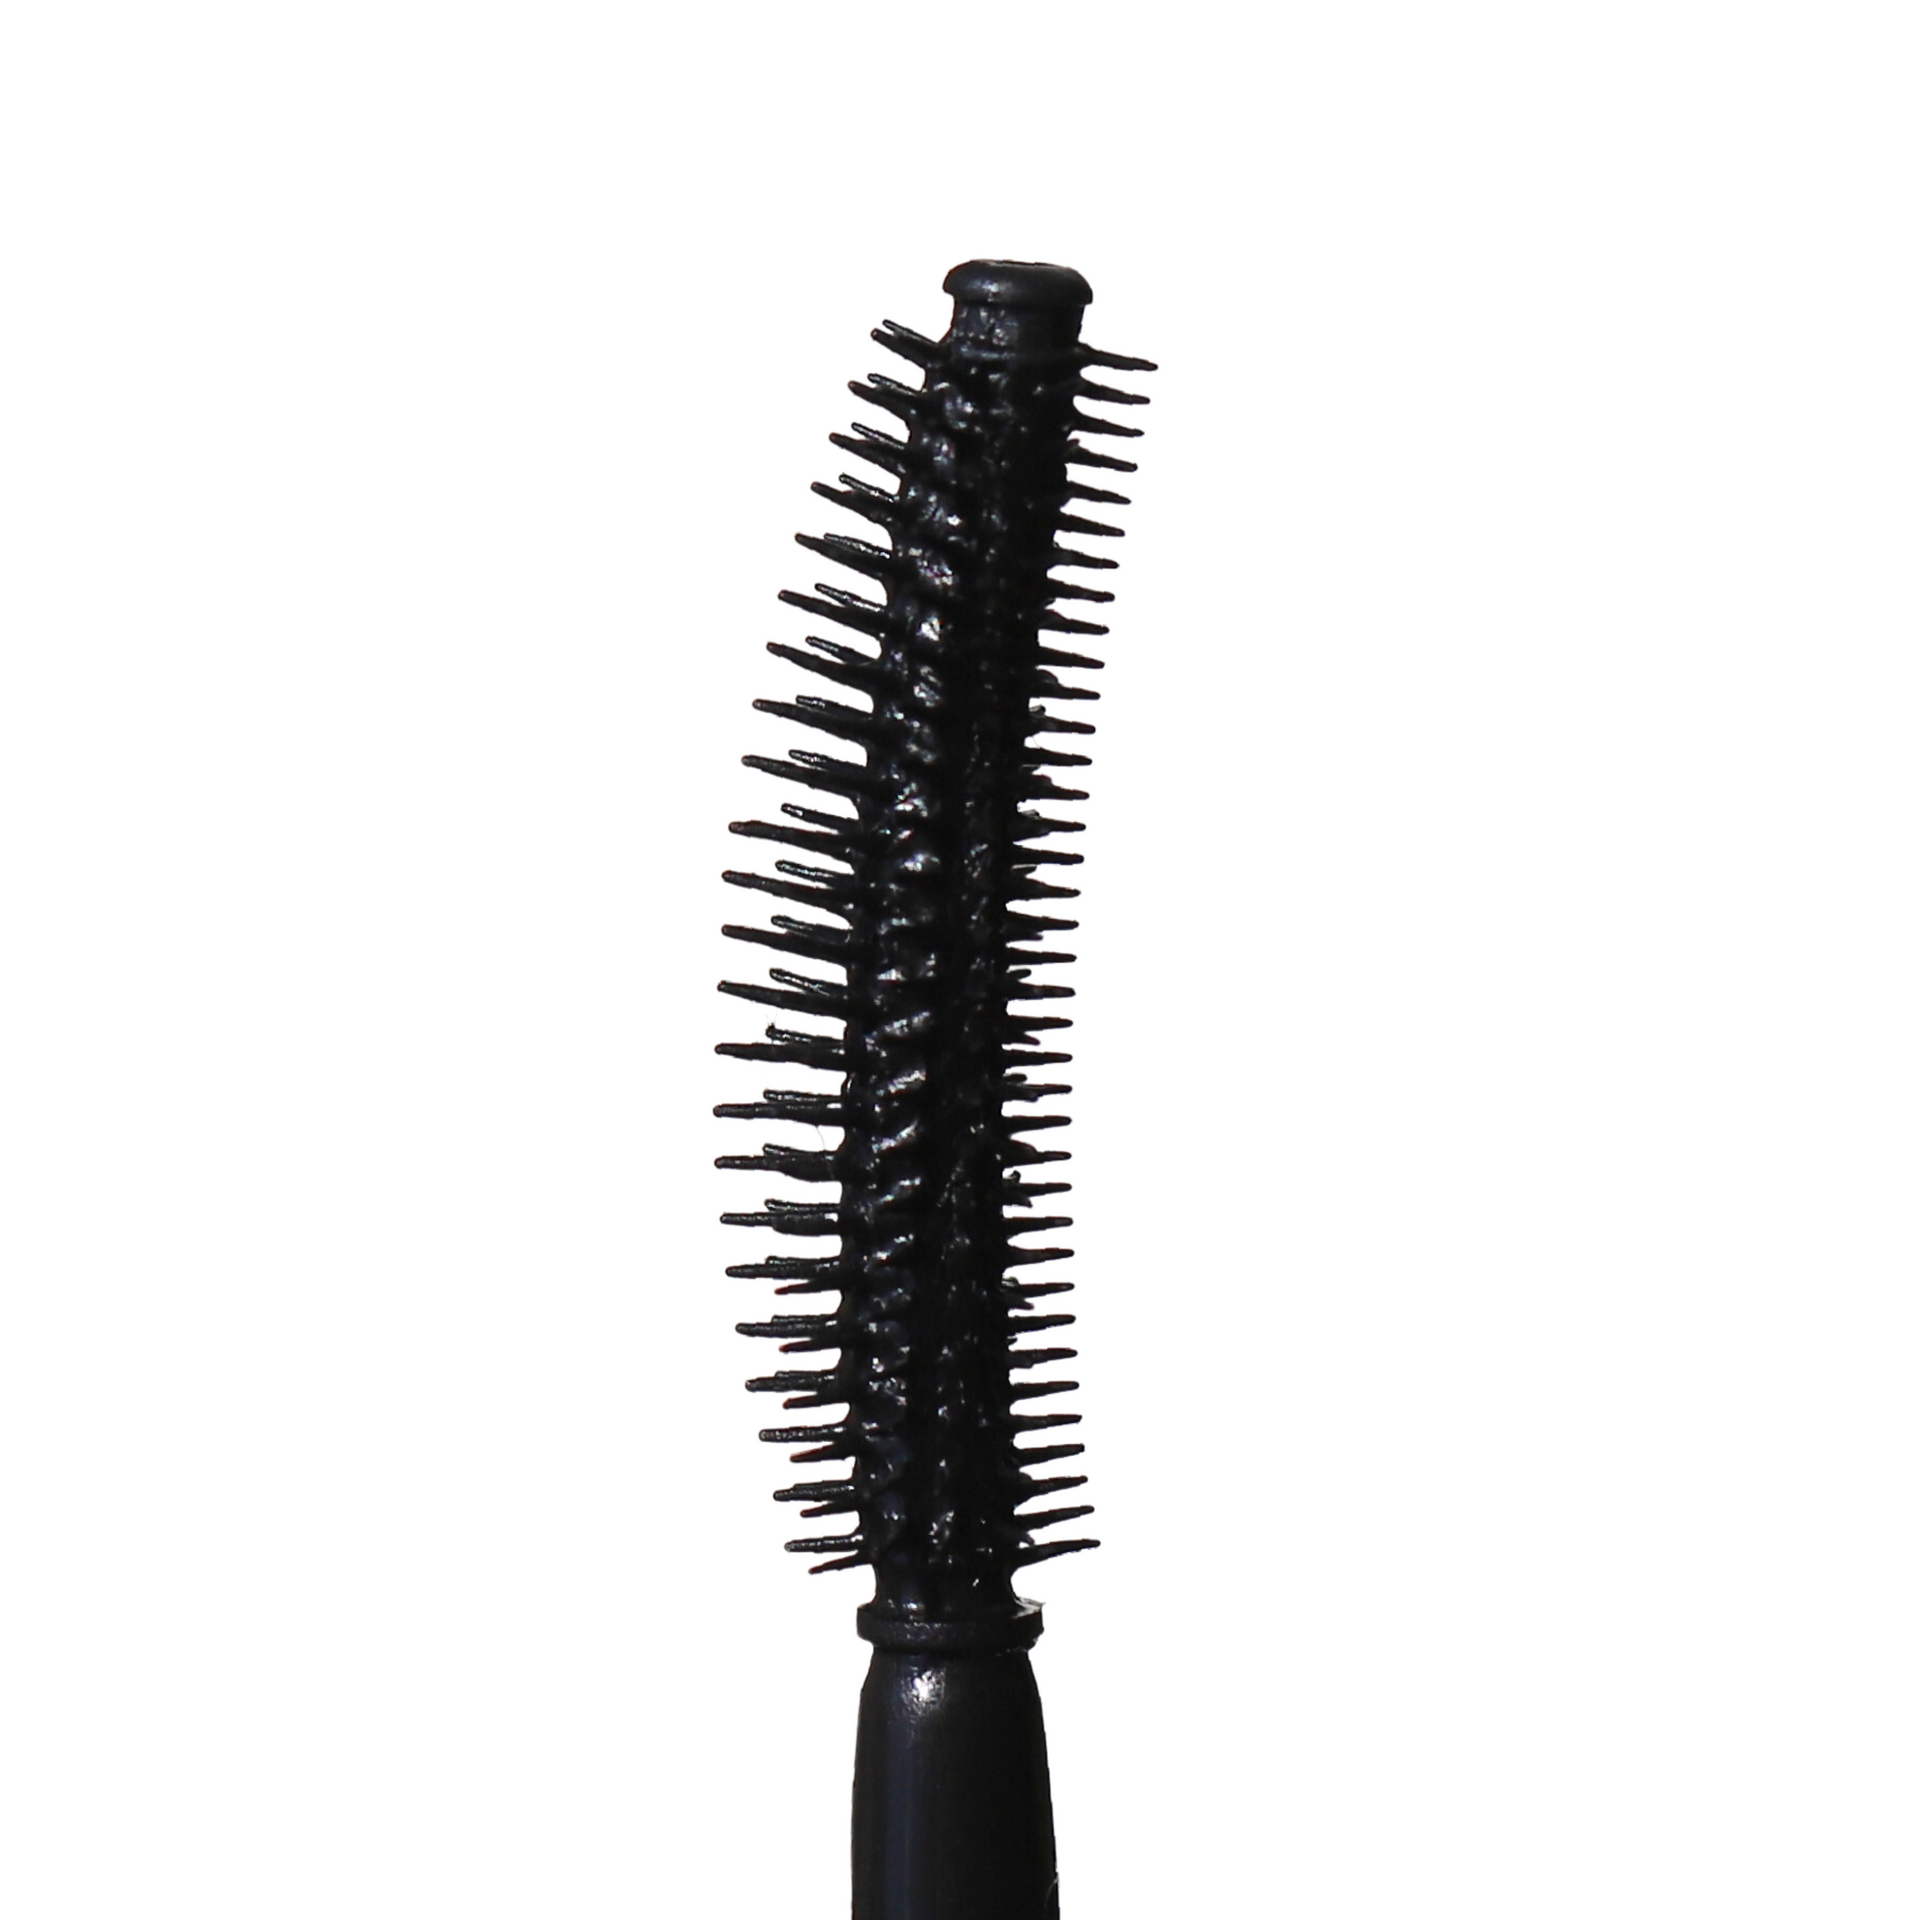 Curved applicator wand for Totally Tubular Tubing Mascara, designed to enhance lash volume and length.